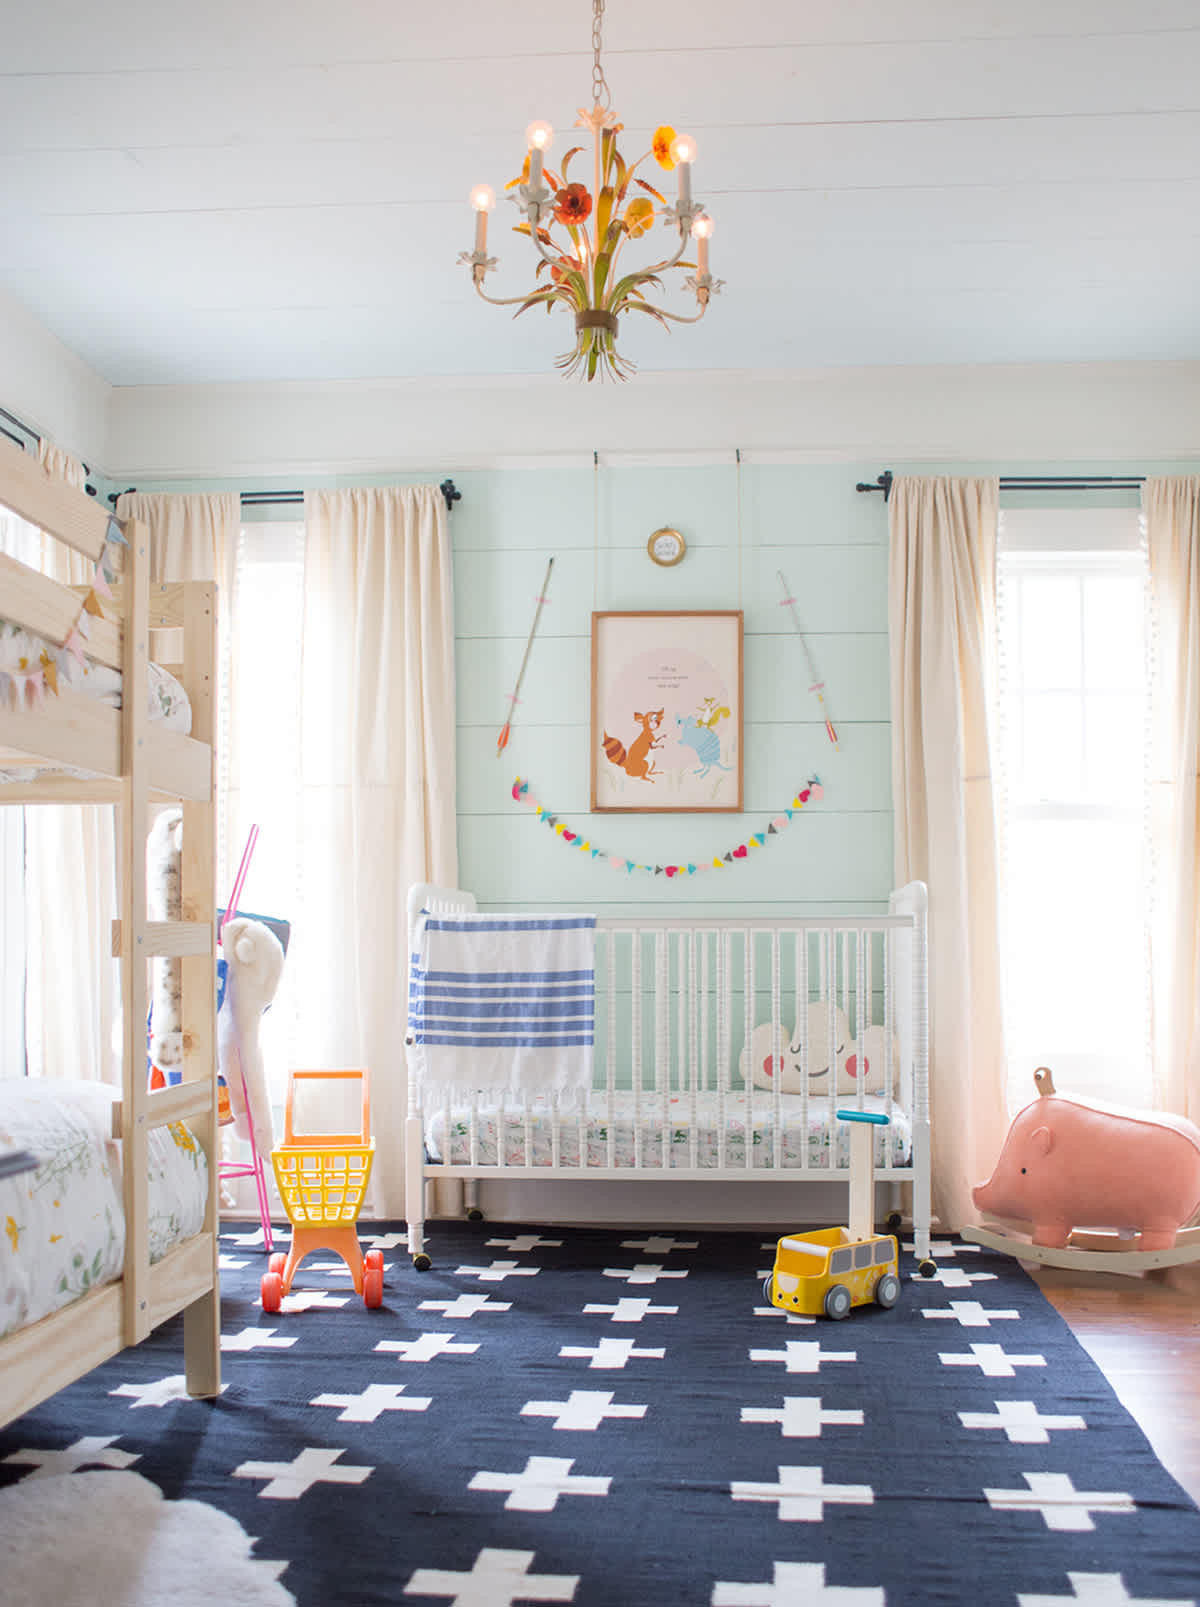 Best Paint For Kids Room
 My Favorite Paint Colors For Kids Rooms And Baby Rooms